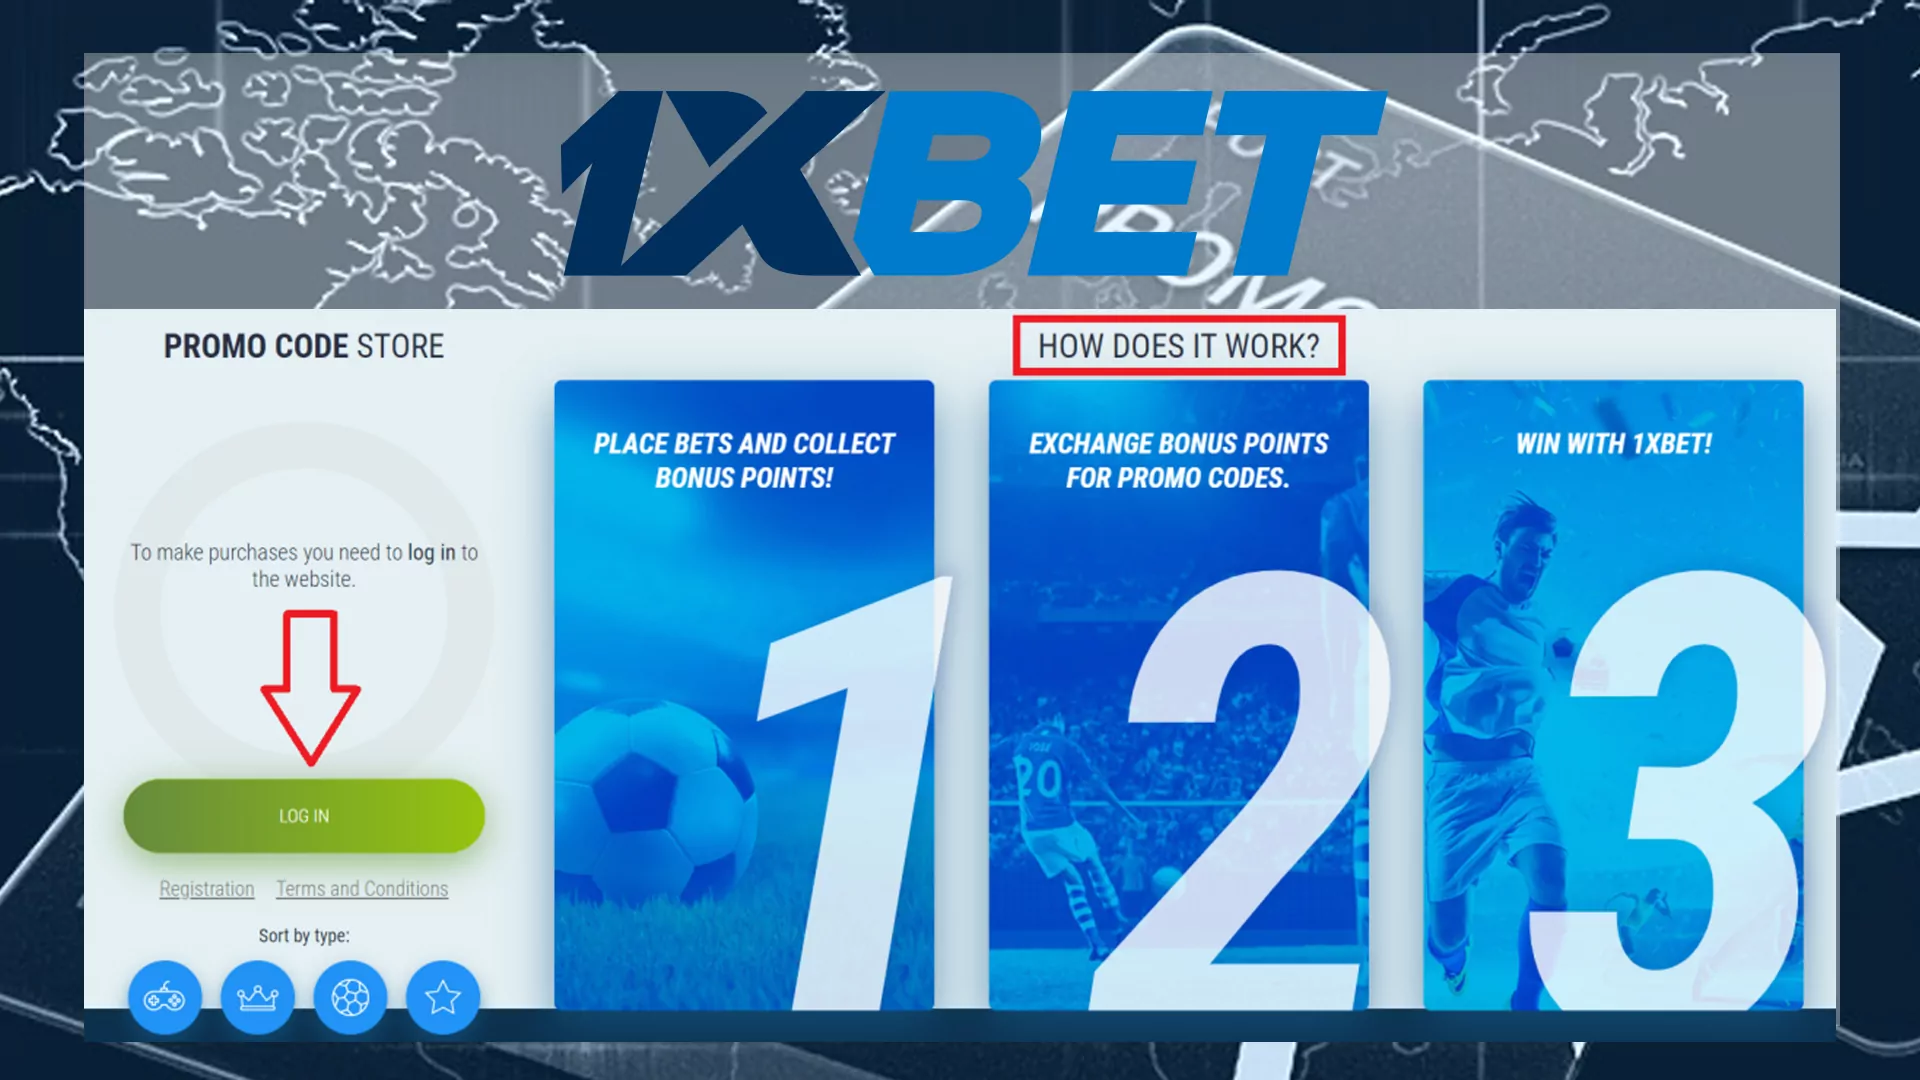 Collect promo points 1xBet and buy gifts in the store.